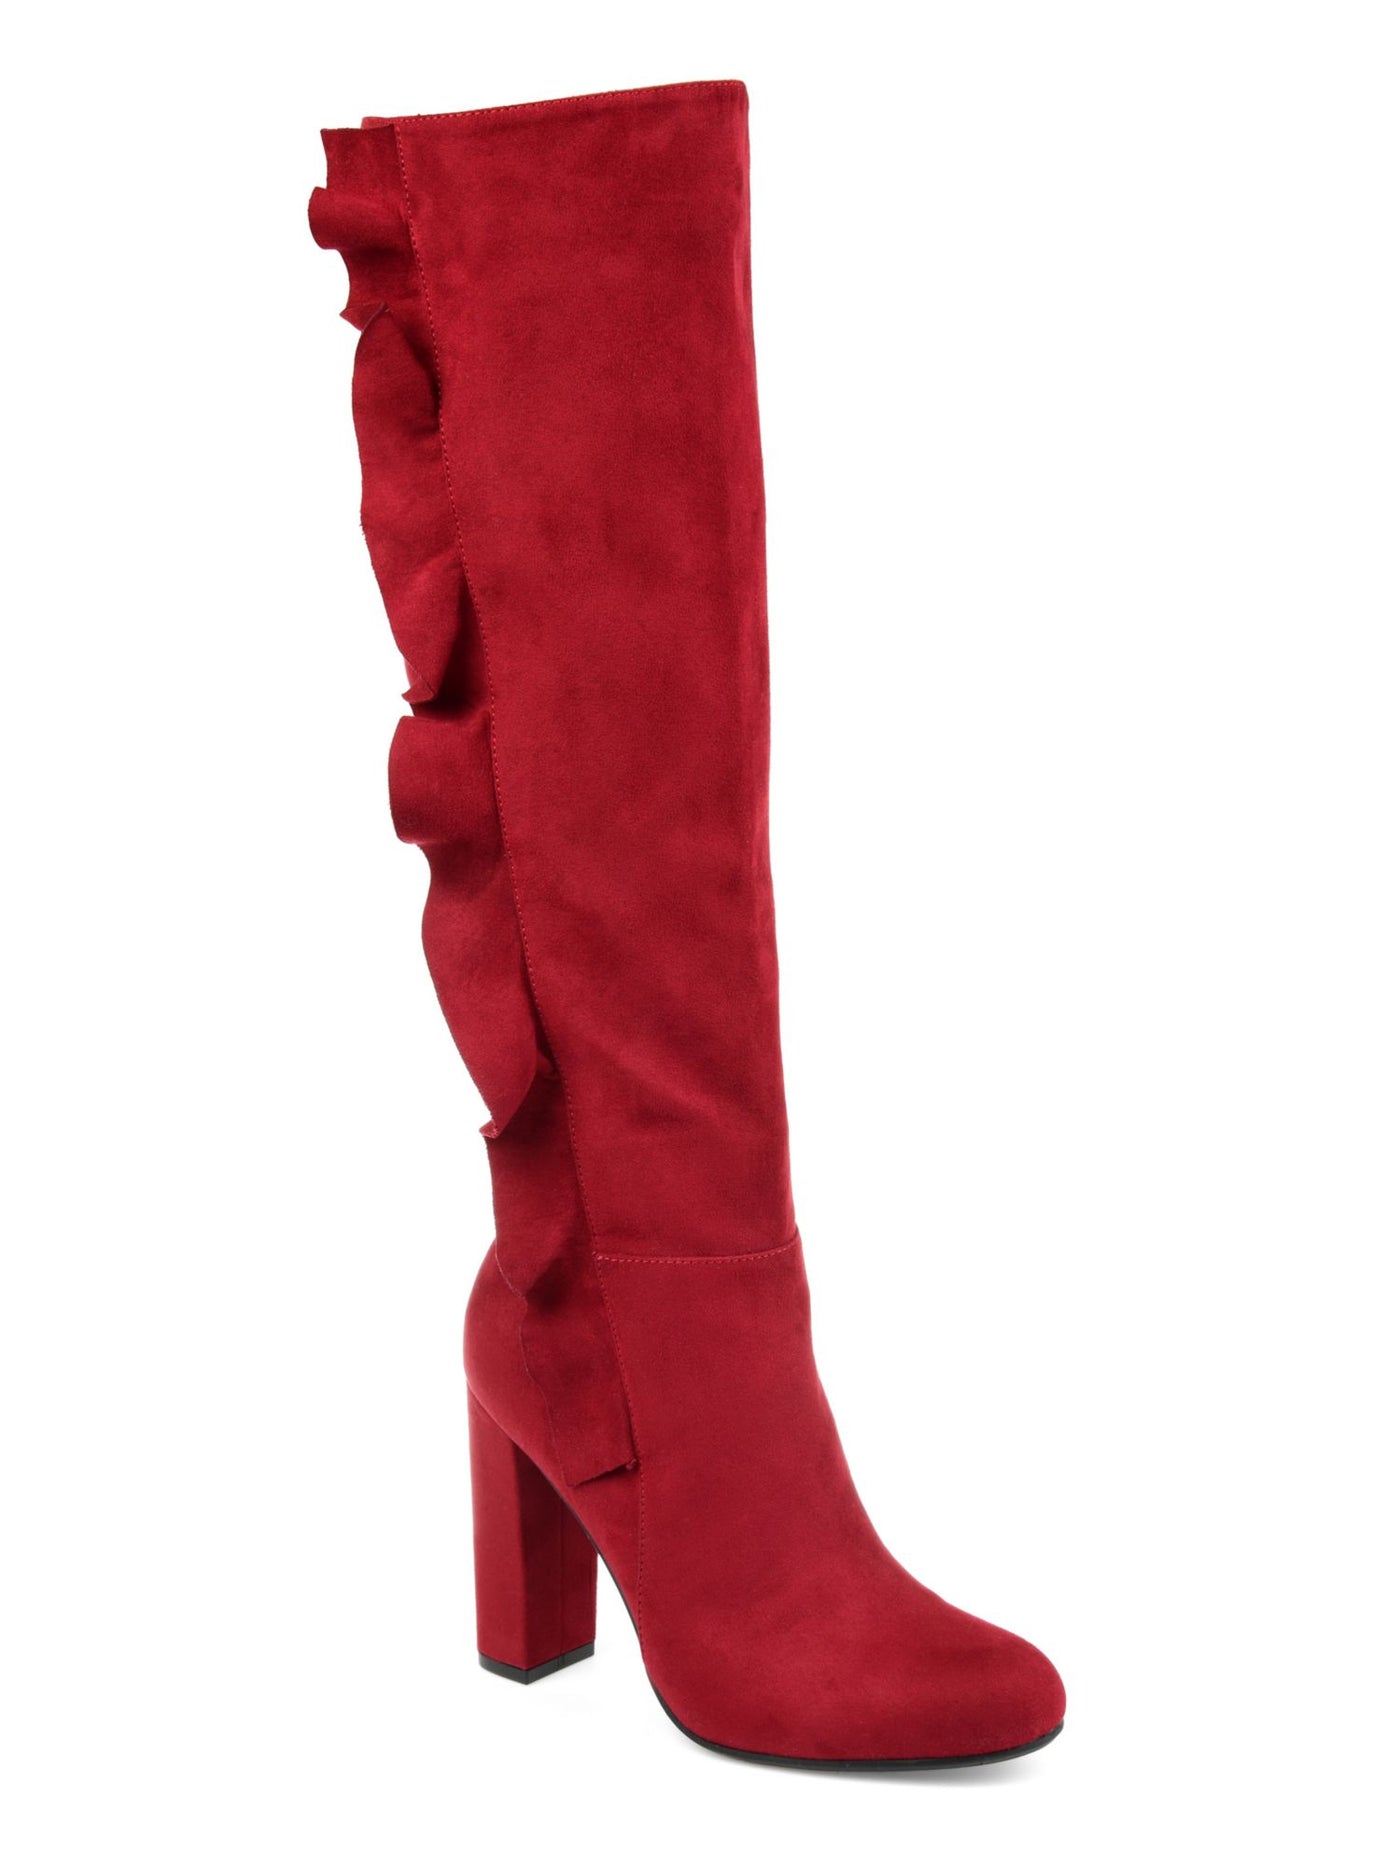 JOURNEE COLLECTION Womens Red Side Ruffle Detail Cushioned Vivian Round Toe Block Heel Zip-Up Dress Boots 7.5